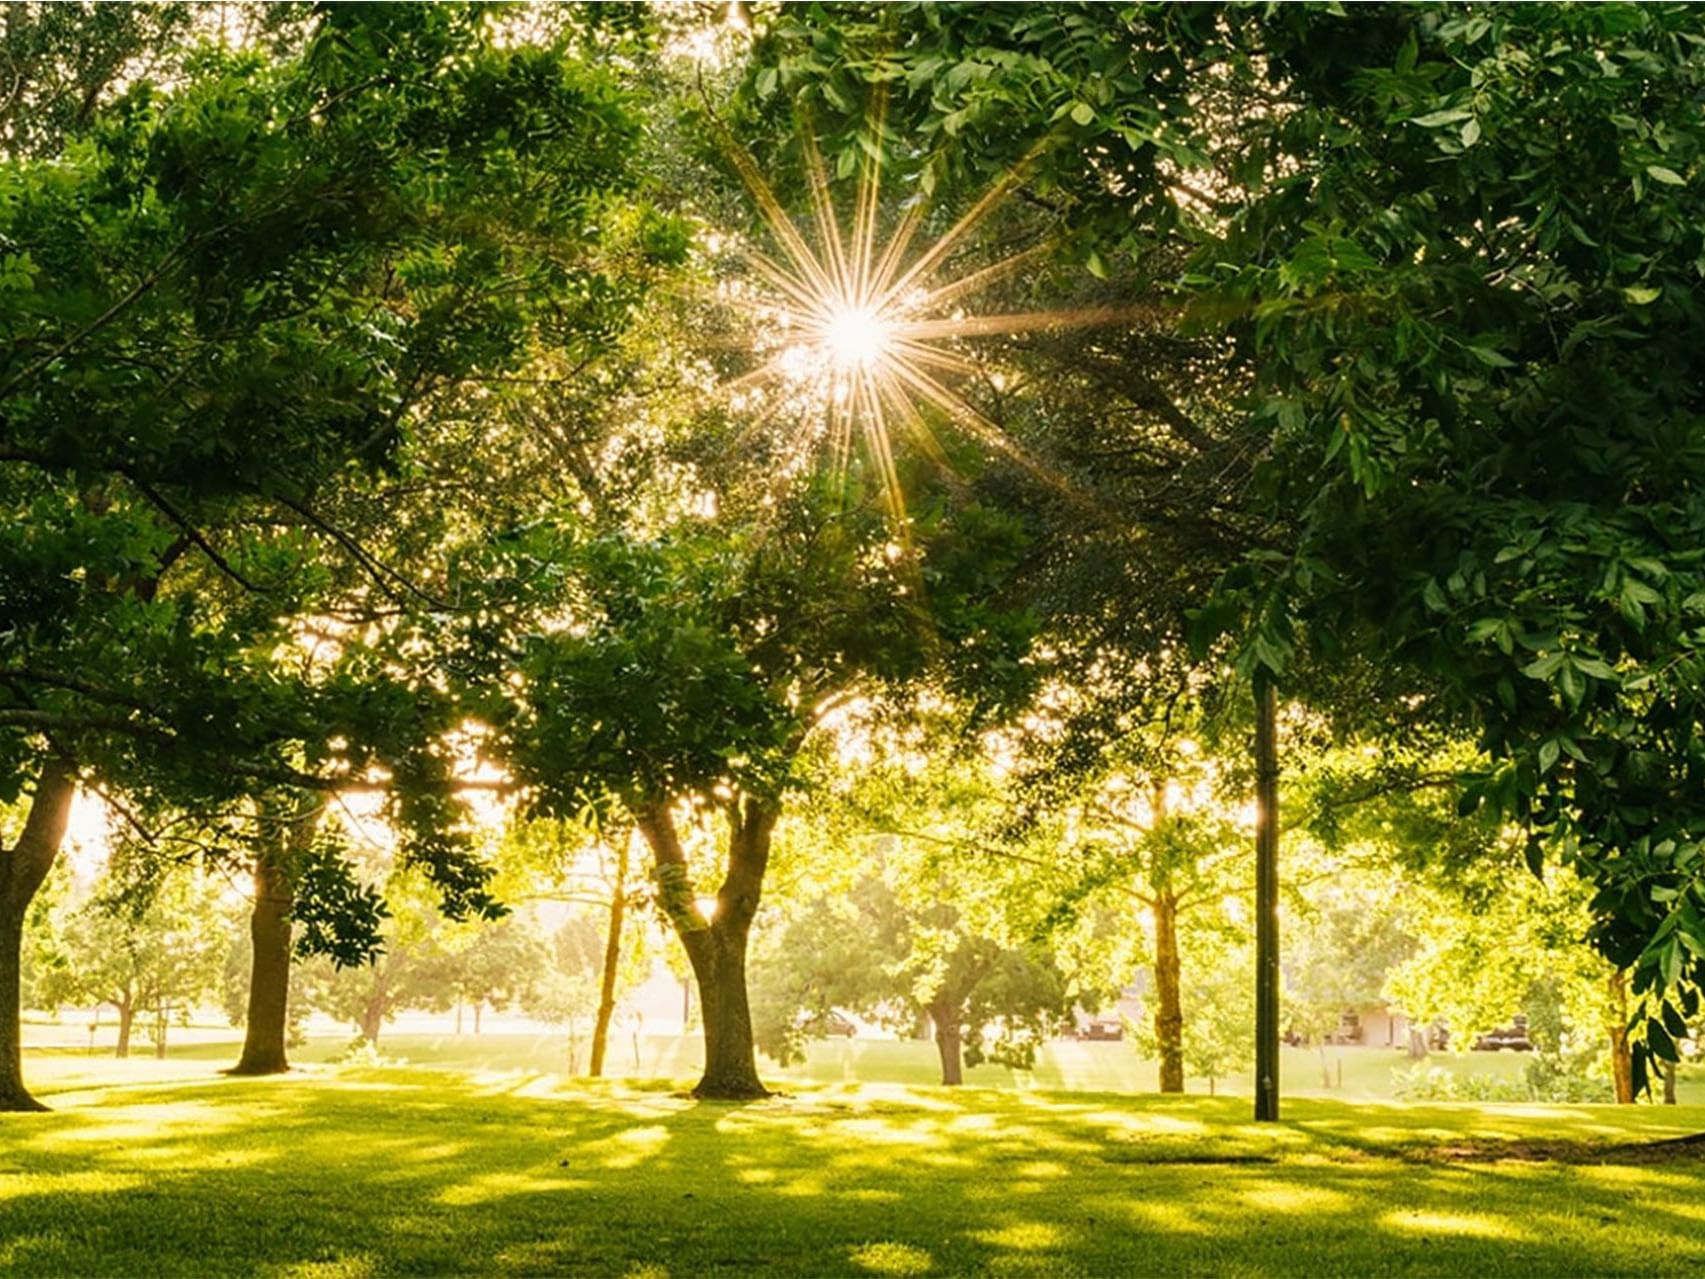 Trees and sunrays in Park at Precise Bad Reichenhall Bavaria